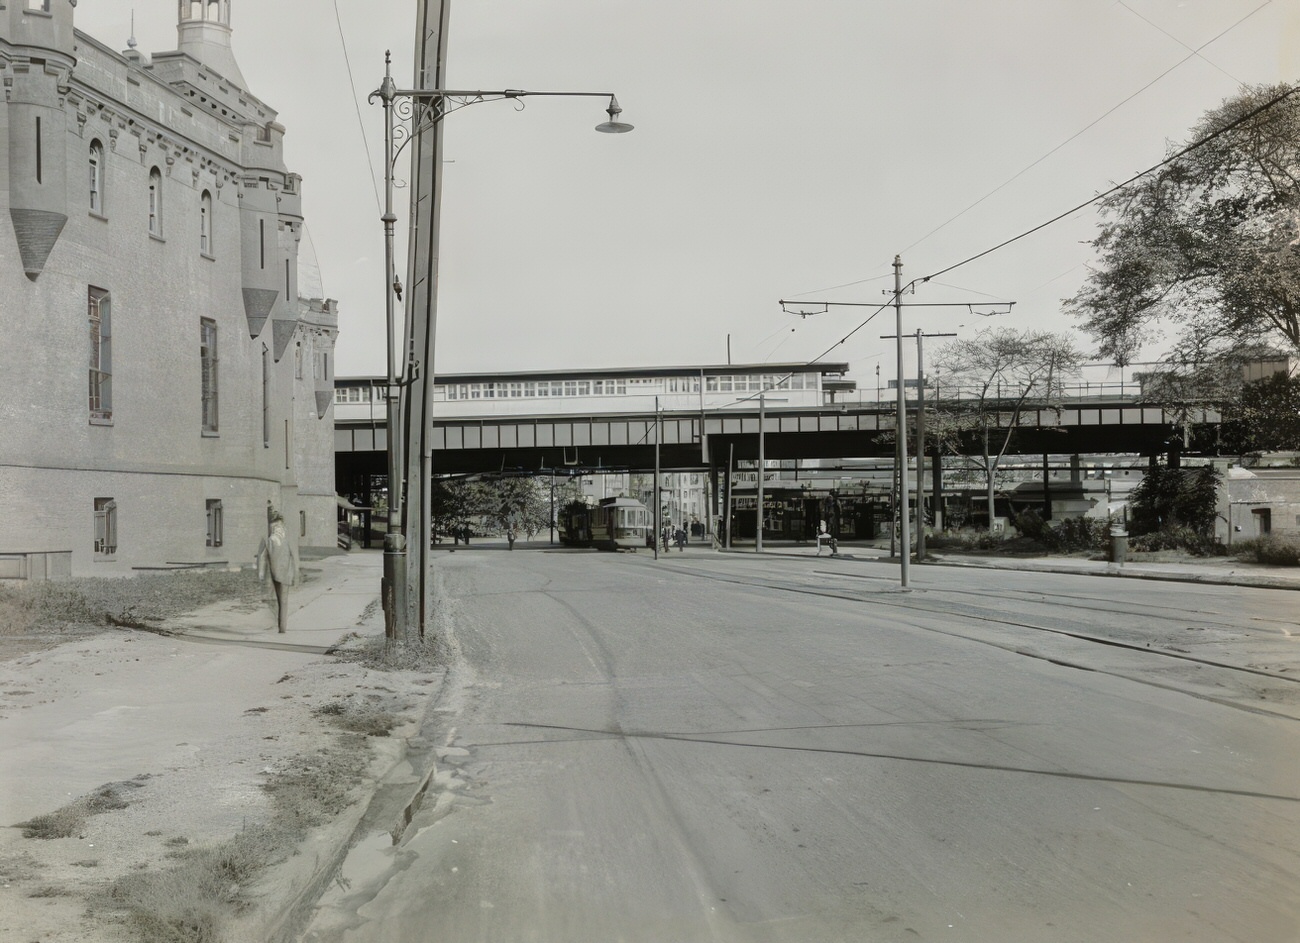 Street Next To Kingsbridge Armory With Elevated Railroad Station In The Background, 1915.